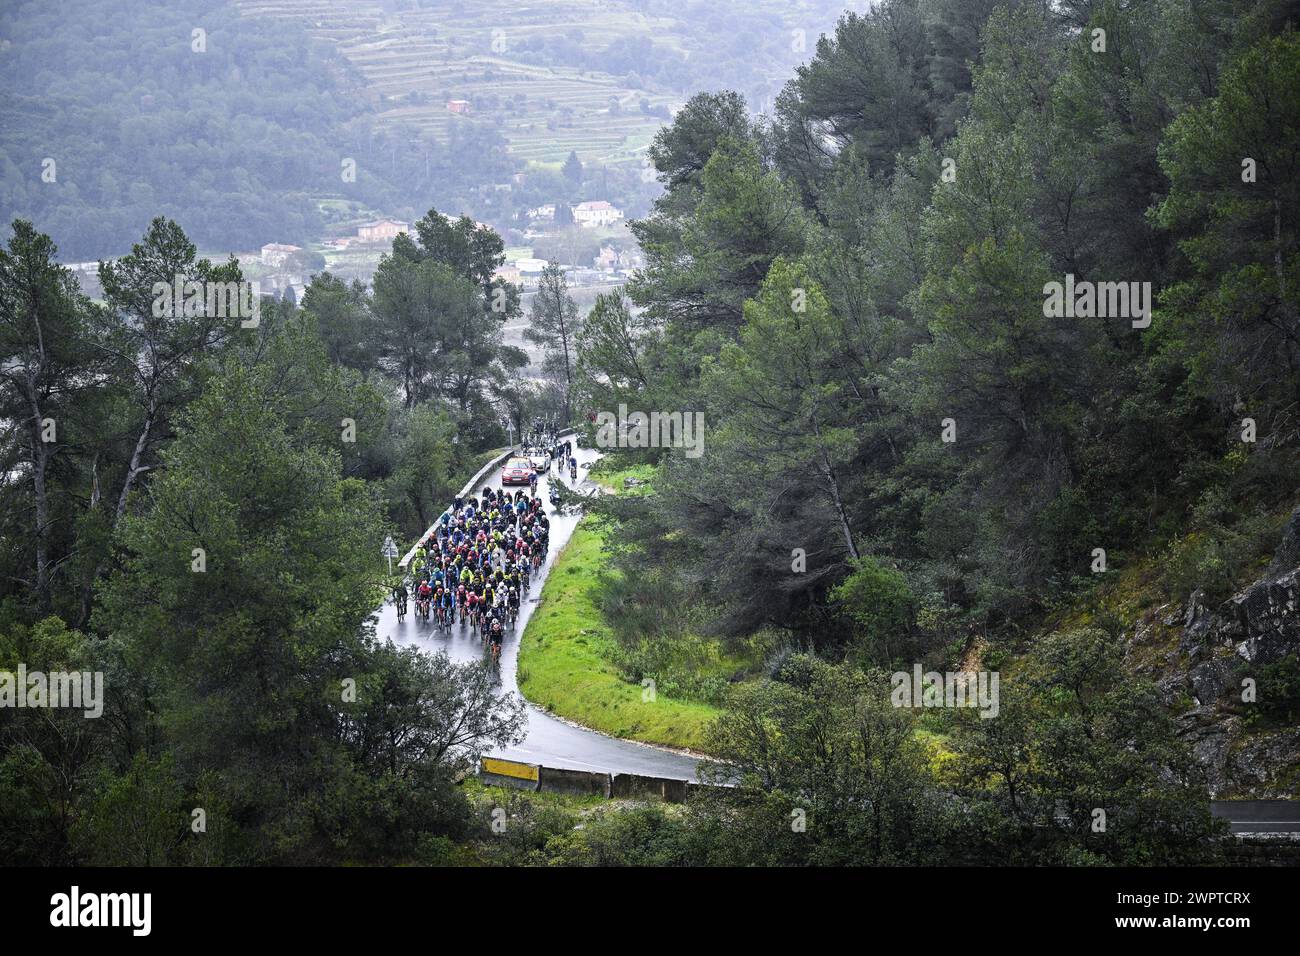 Illustration picture shows the peloton during the seventh stage of the